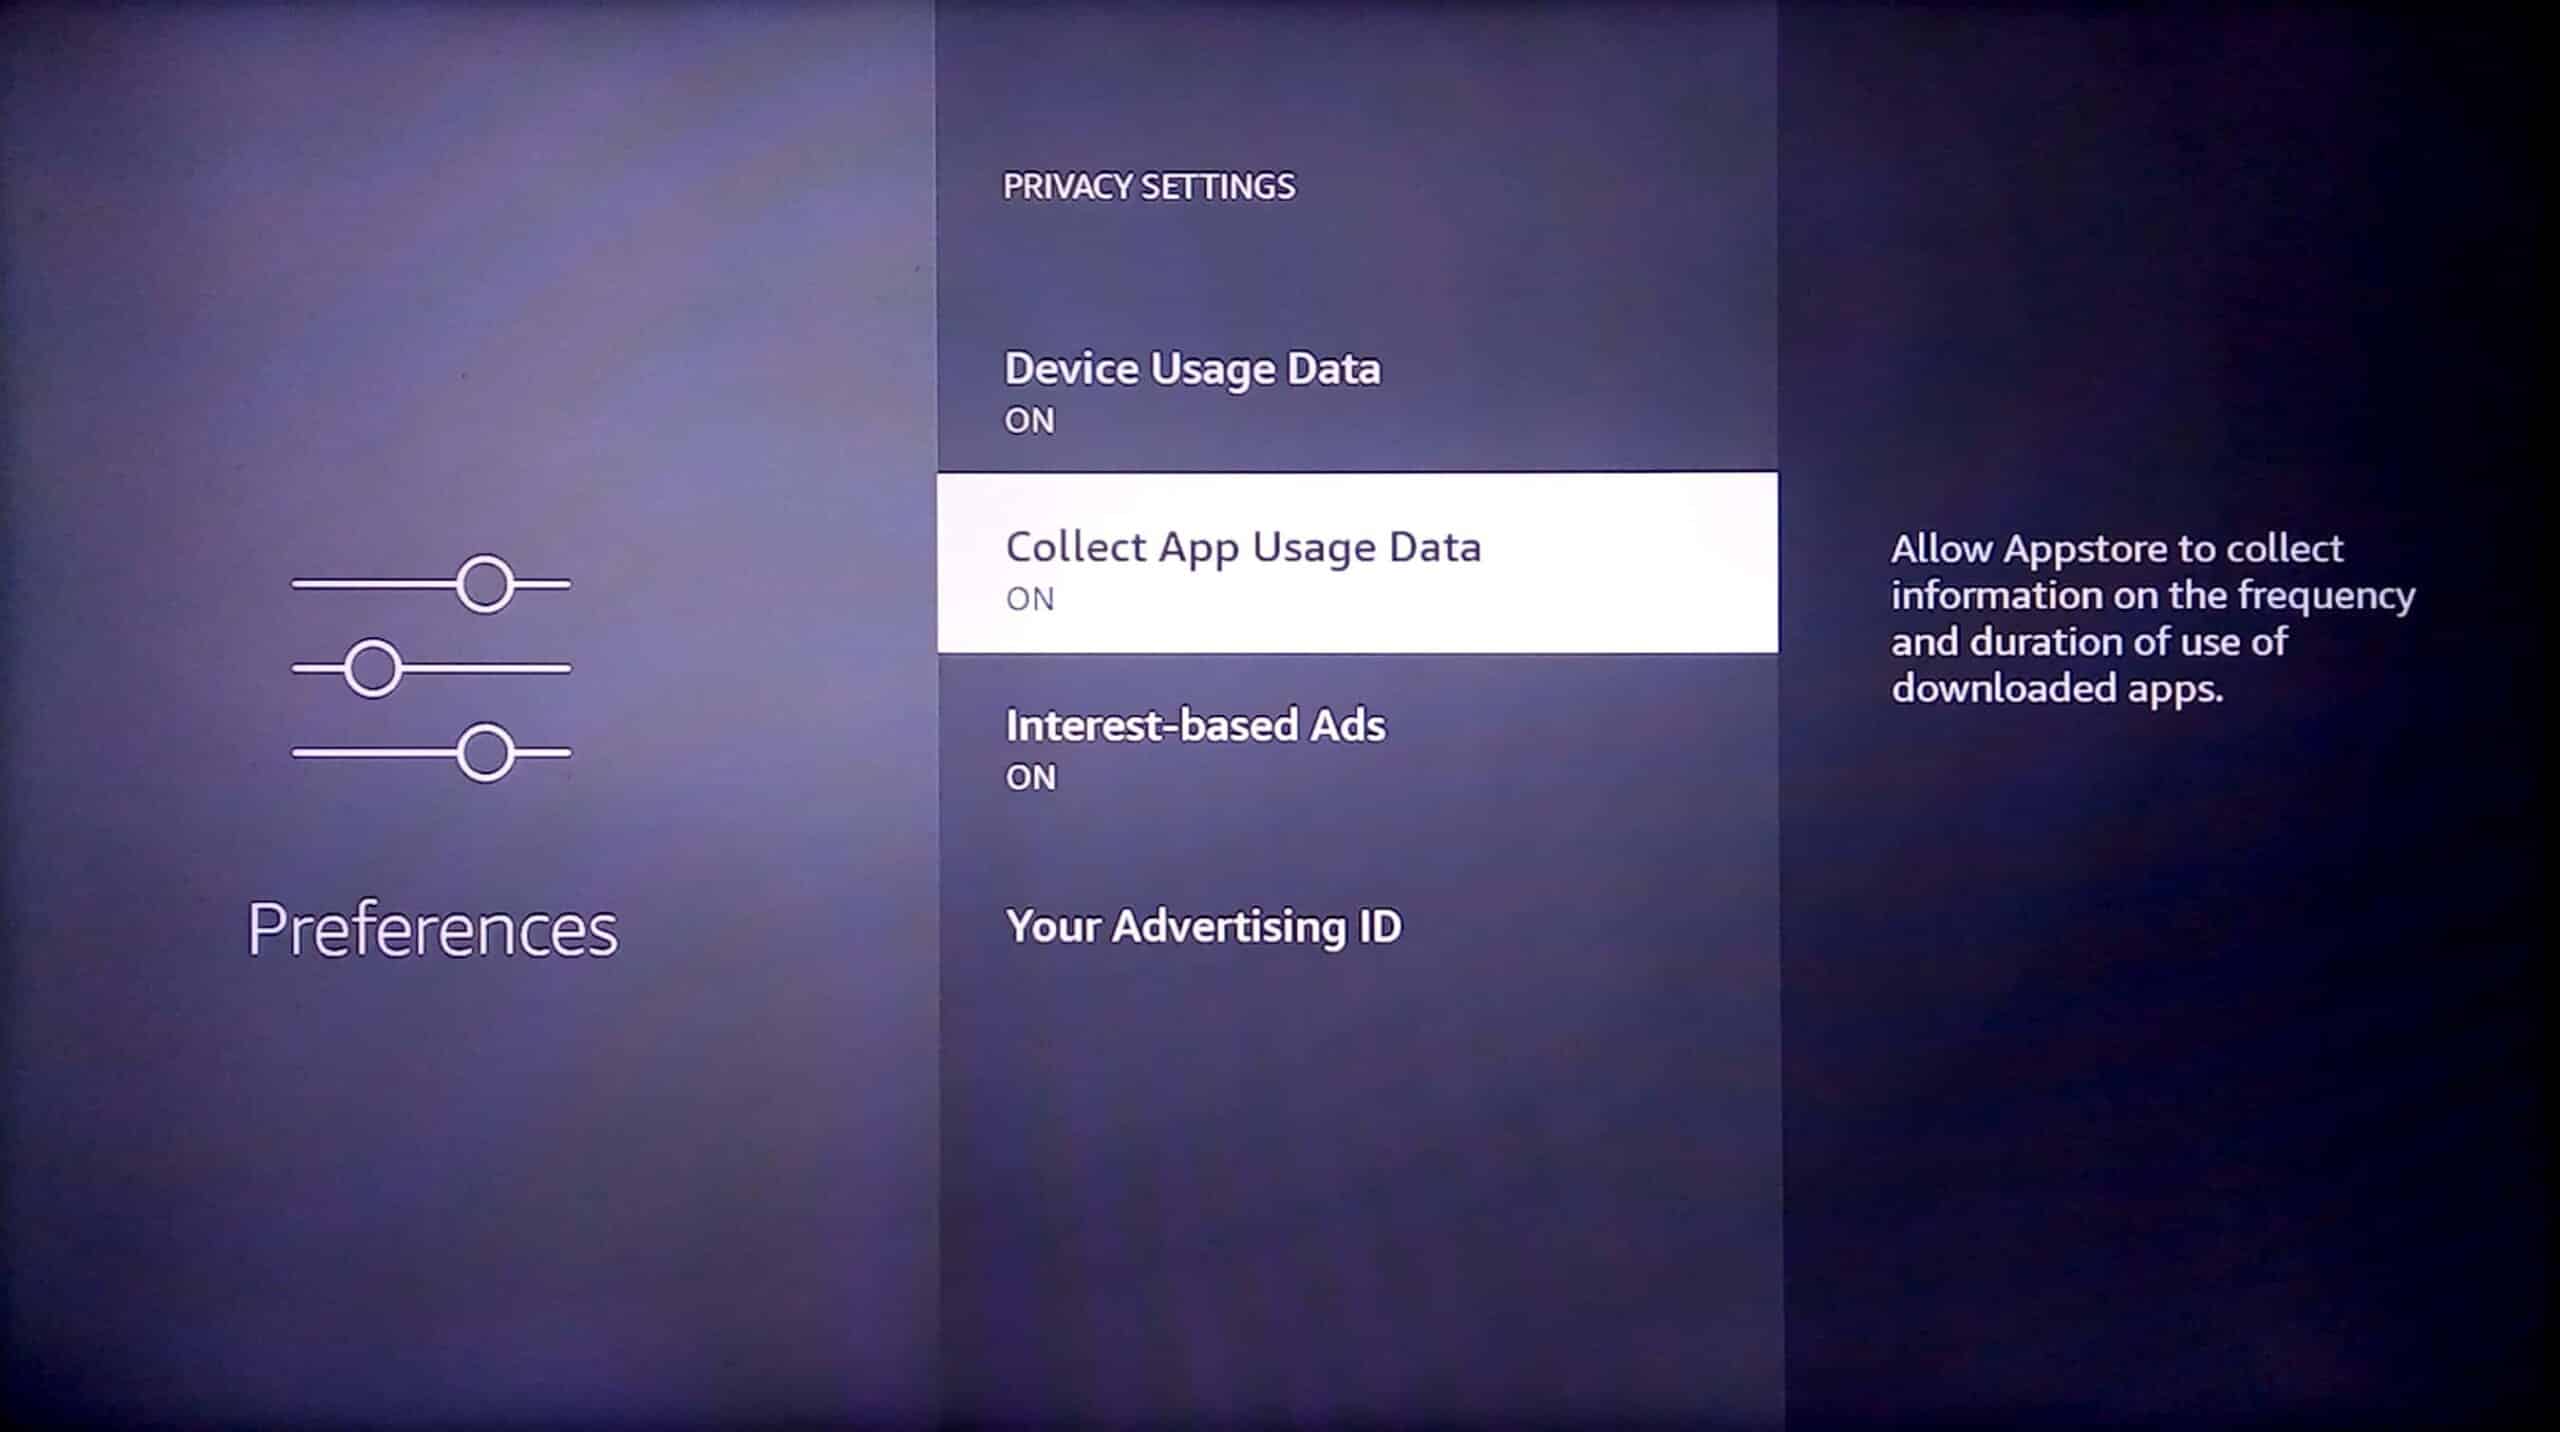 press on collect app usage data. Fix Amazon Fire Stick Slow Issue